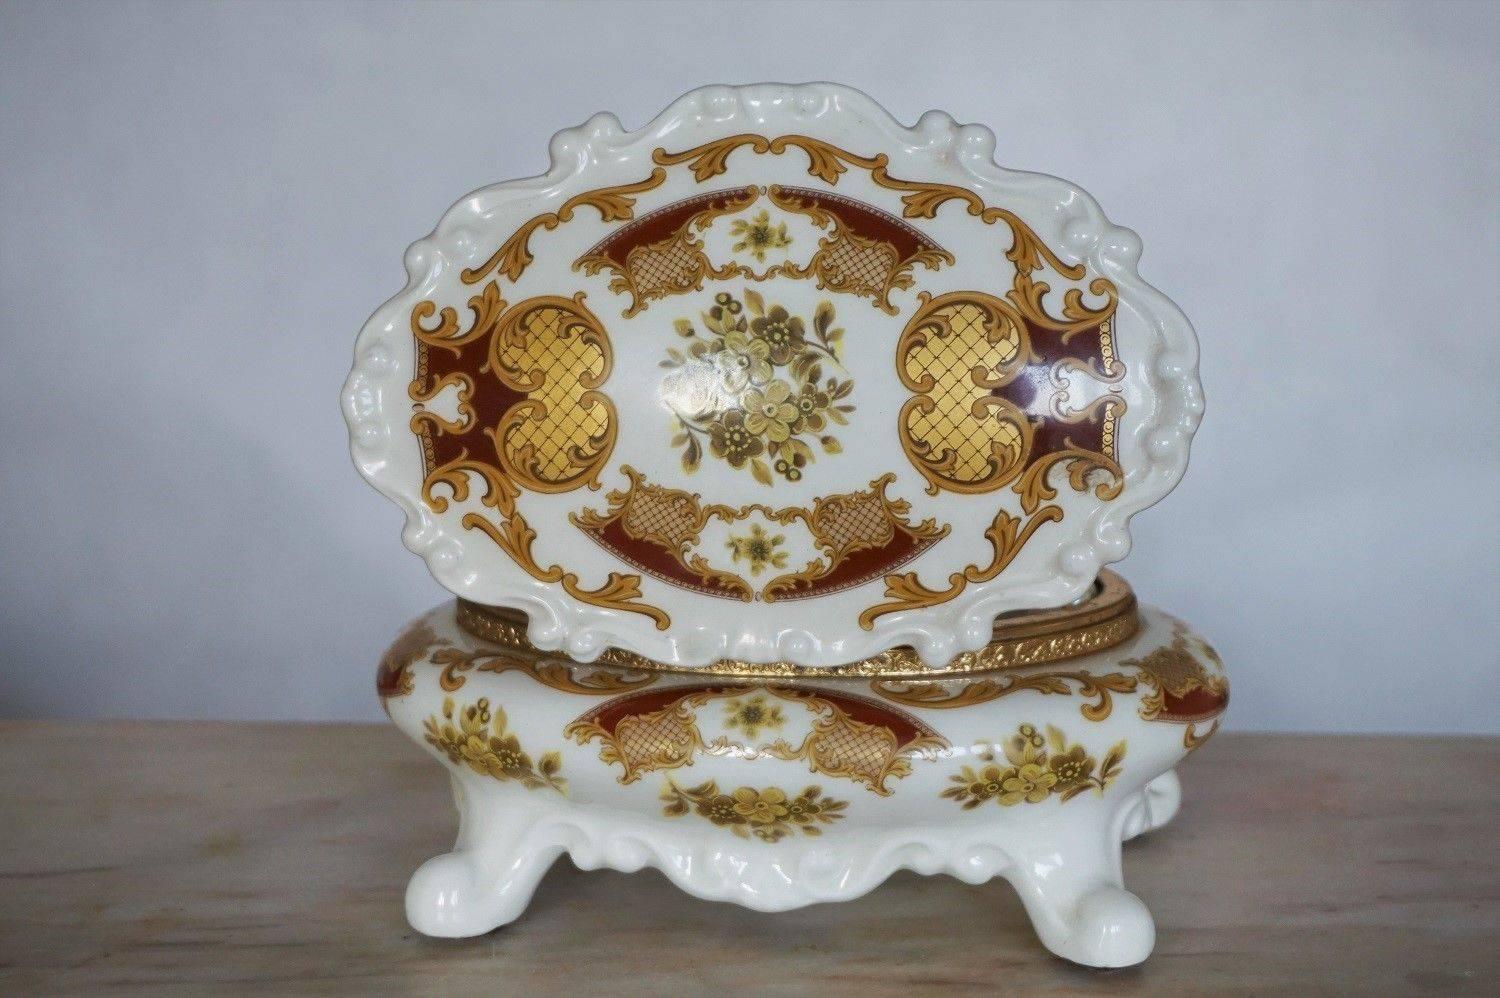 Italian hand-painted porcelain and brass jewel box, circa 1960.
Very good condition, no chips or cracks, brass with patina of age.
Measures:
Width 7 in (18 cm) 
Depth 5.10 in (13 cm)
Height 3.75 in (9.5 cm)

  